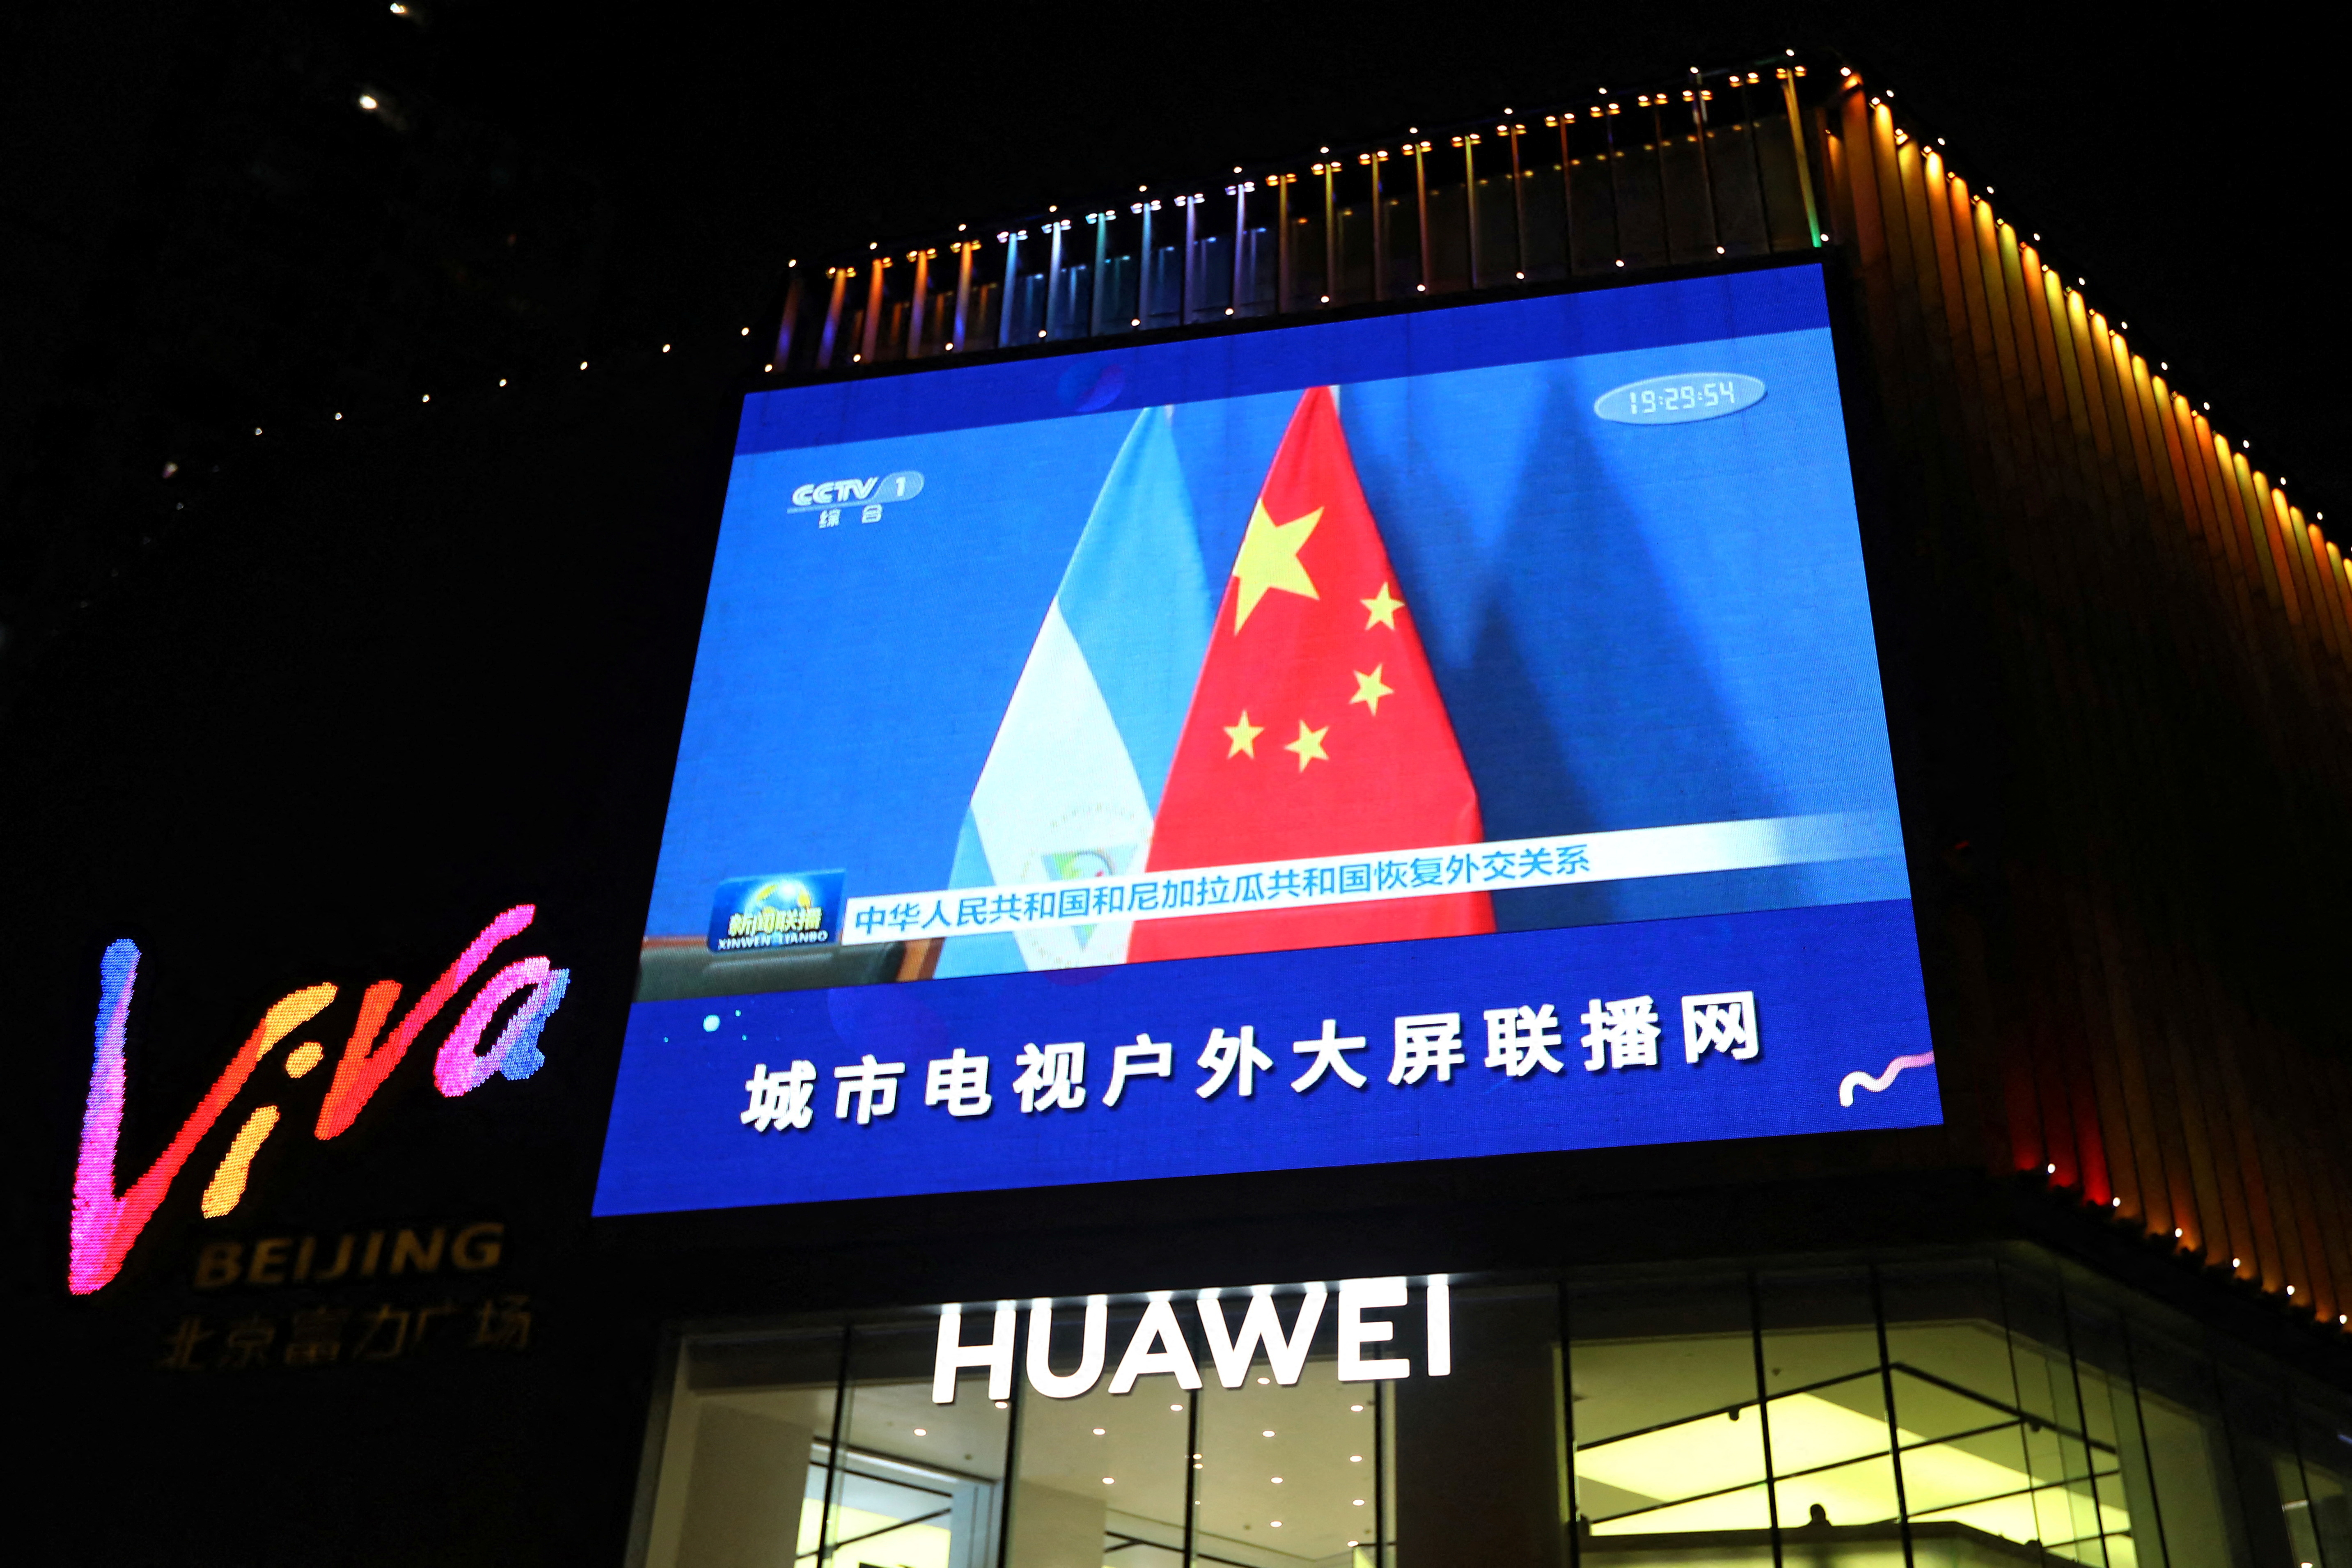 A screen shows news footage of flags of the People's Republic of China and the Republic of Nicaragua, in Beijing